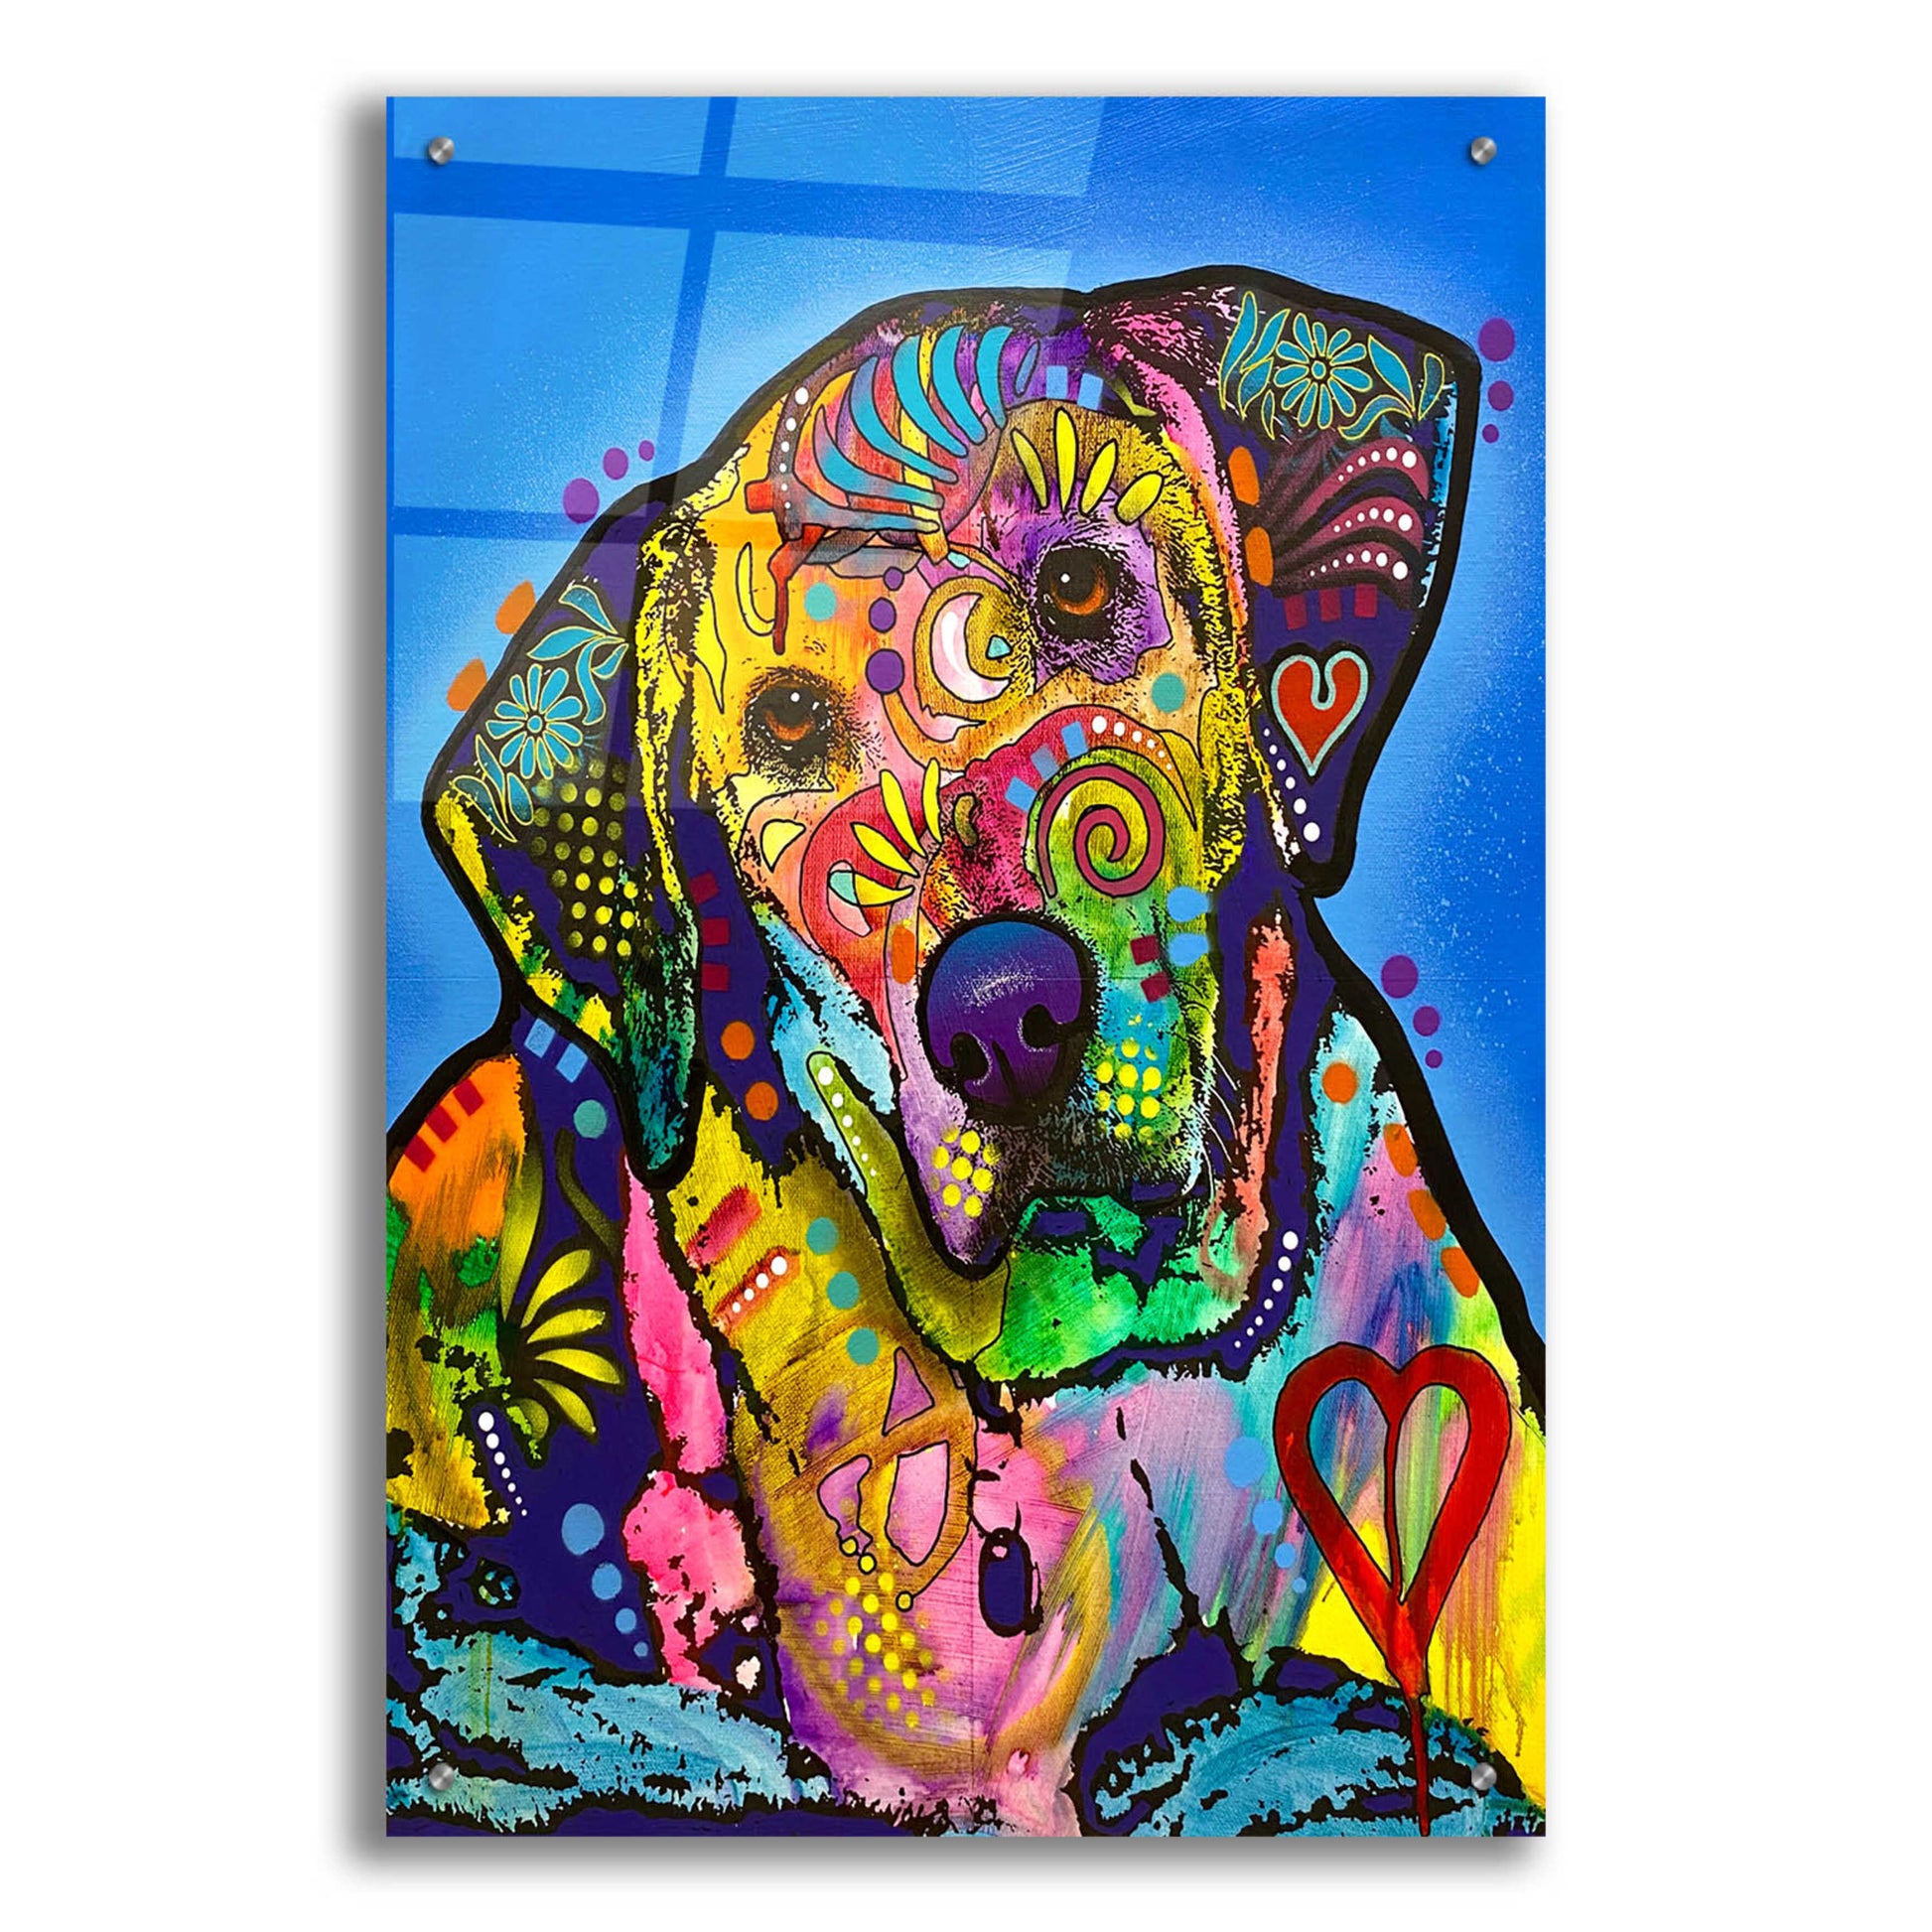 Epic Art 'Got Any Snacks' by Dean Russo, Acrylic Glass Wall Art,,24x36